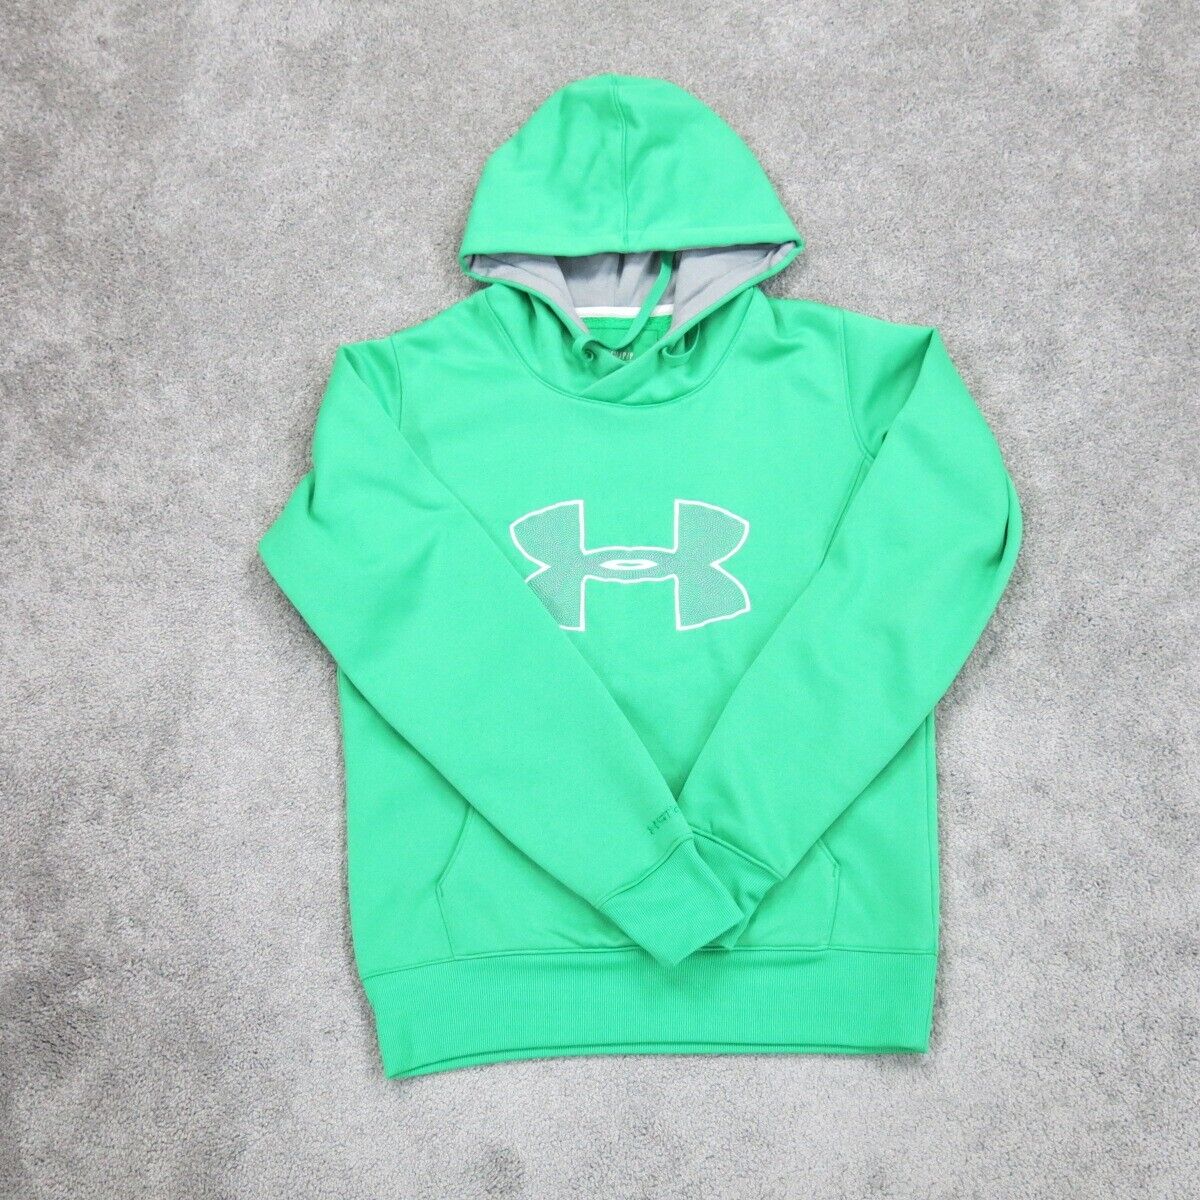 Under Armour, Sweaters, Lime Green Womens Xl Under Armor Sweatshirt